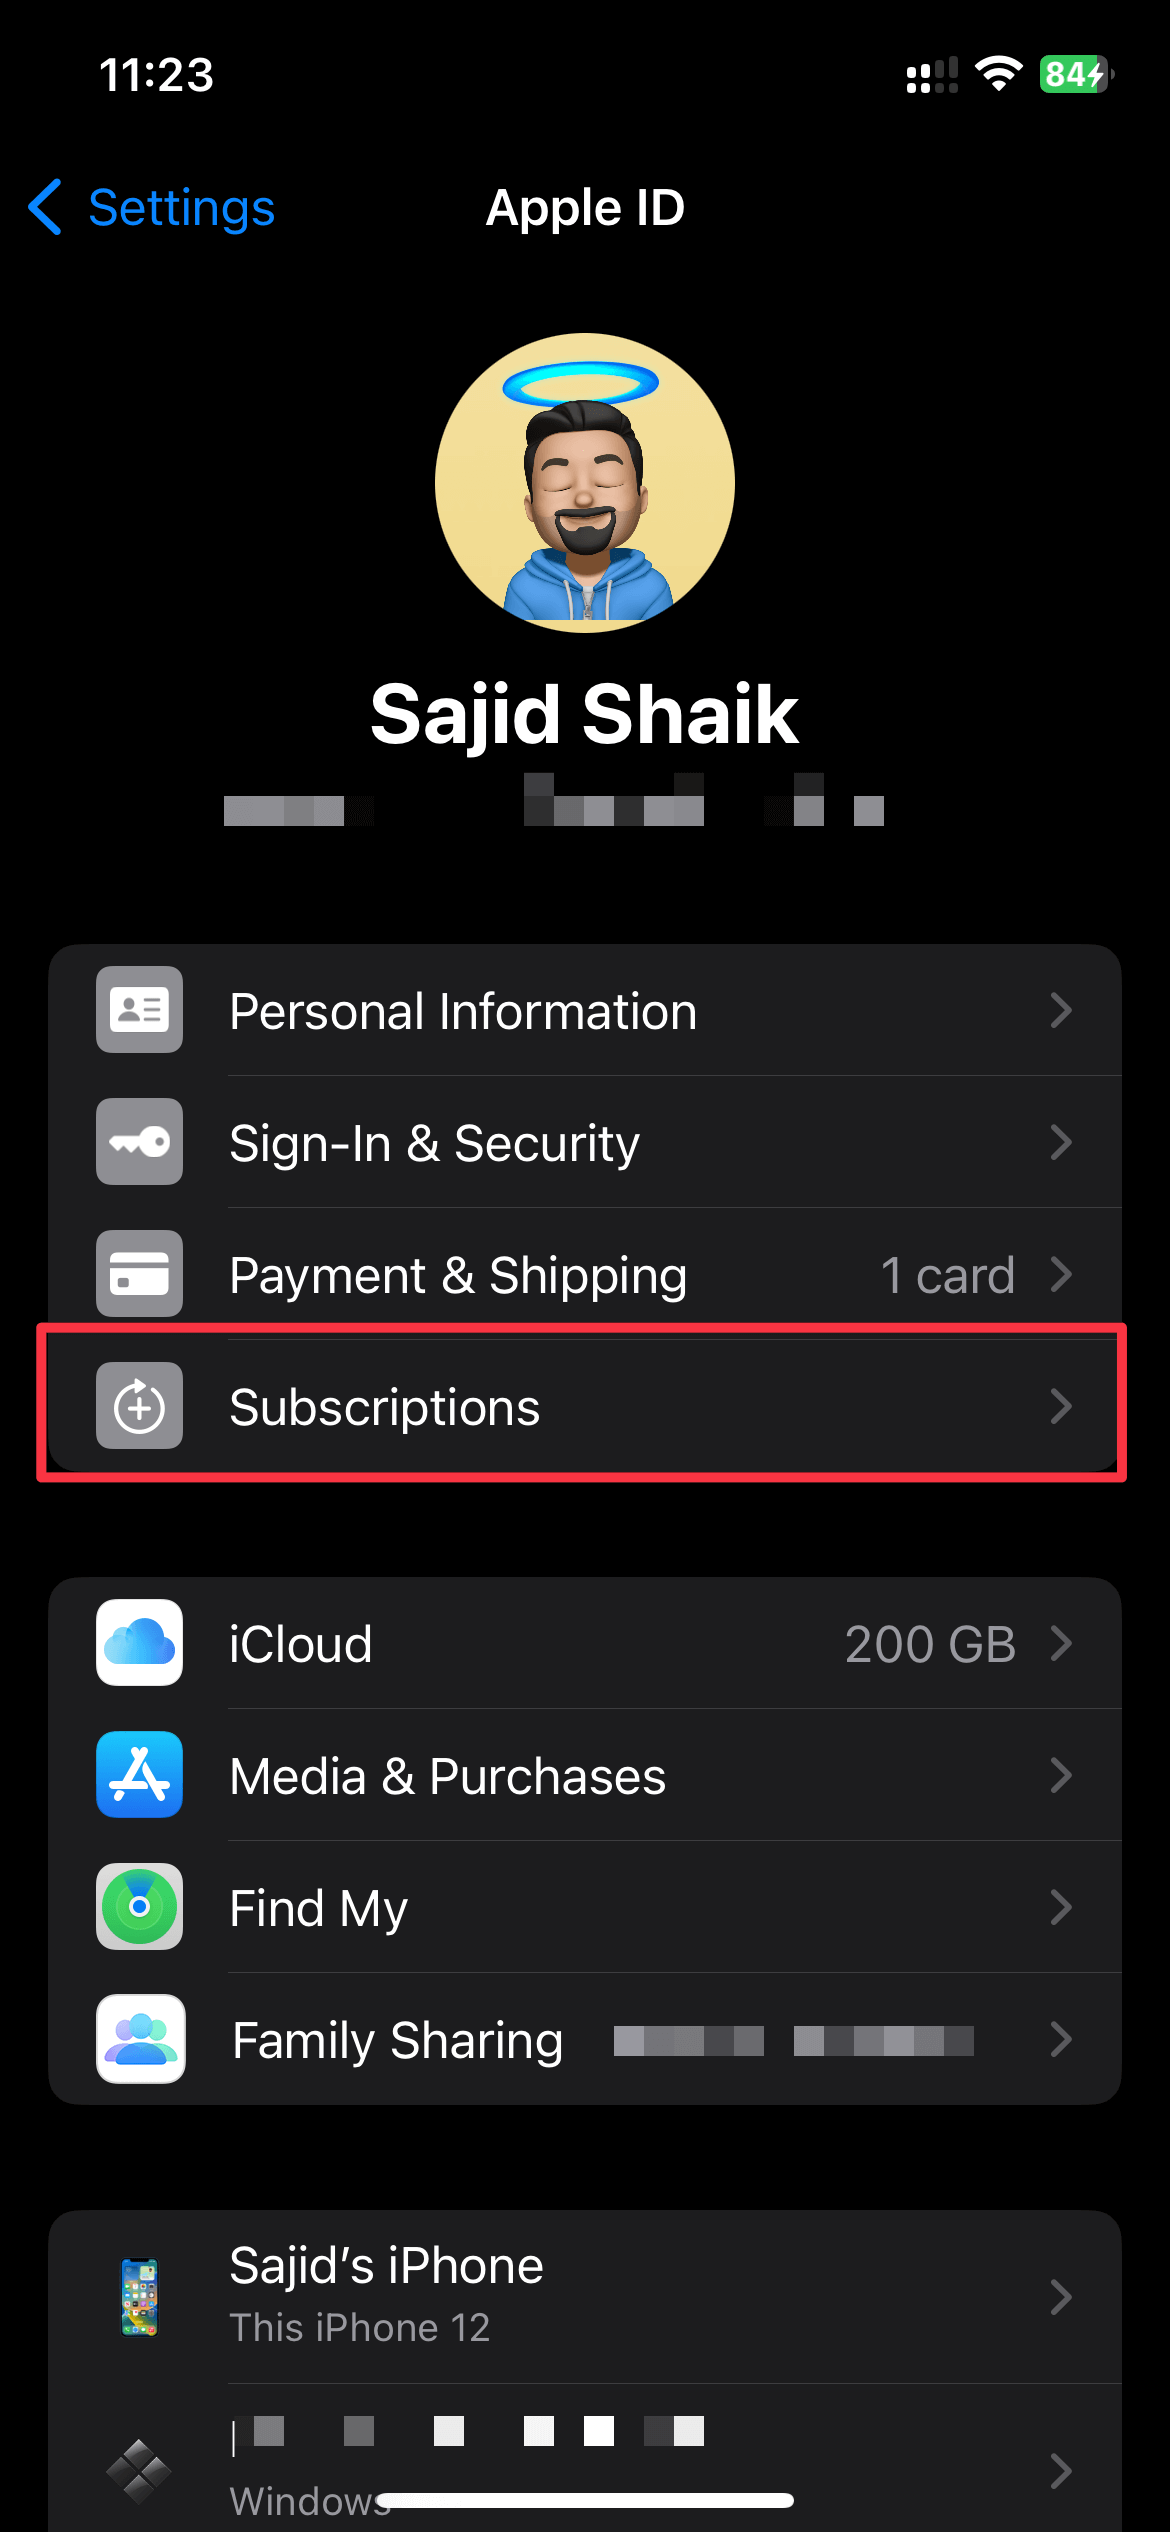 Select Subscriptions in Apple ID Settings on iPhone